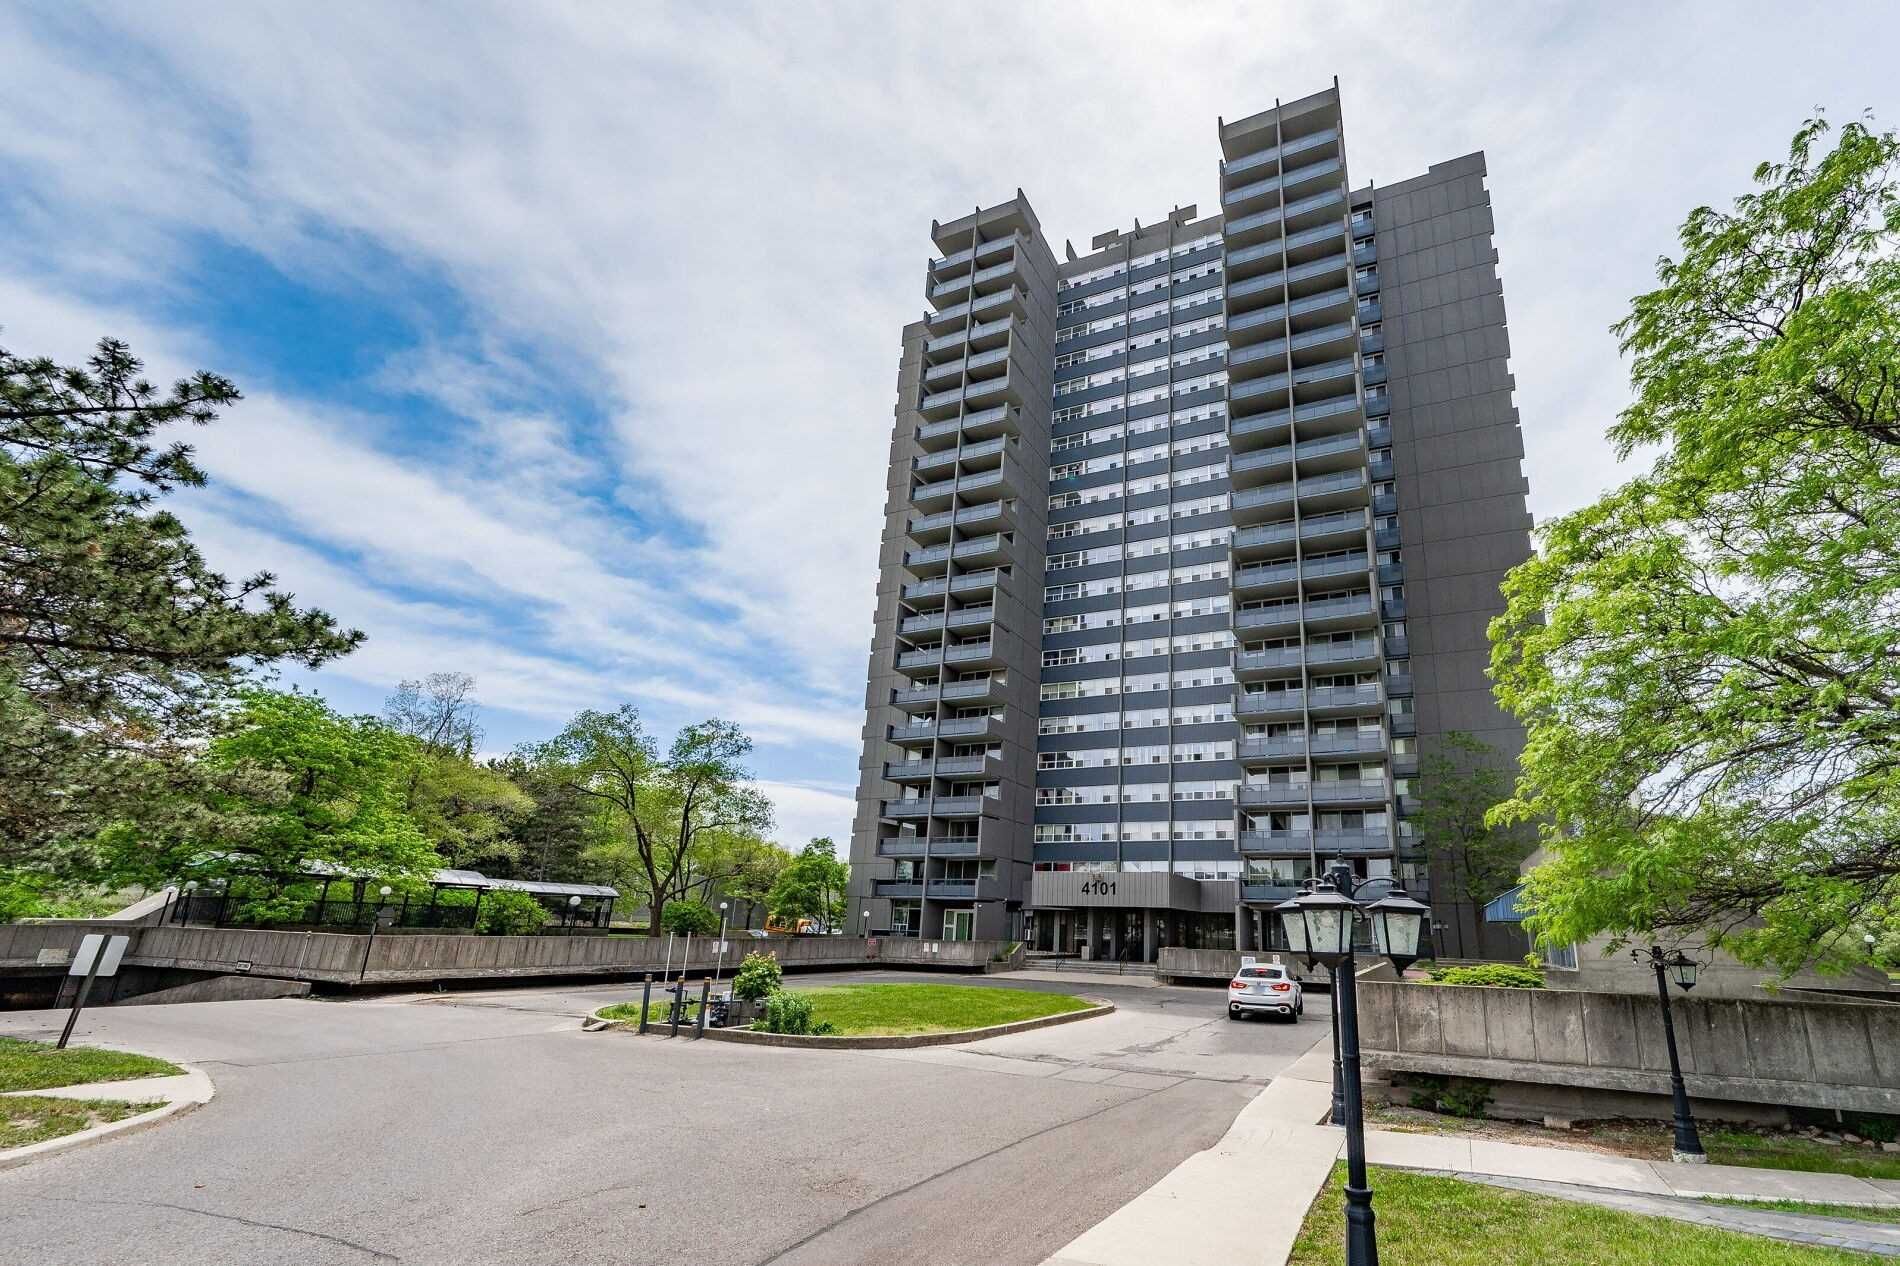 4101 Sheppard Ave E. This condo at 4091-4101 Sheppard Avenue East Condos is located in  Scarborough, Toronto - image #1 of 2 by Strata.ca